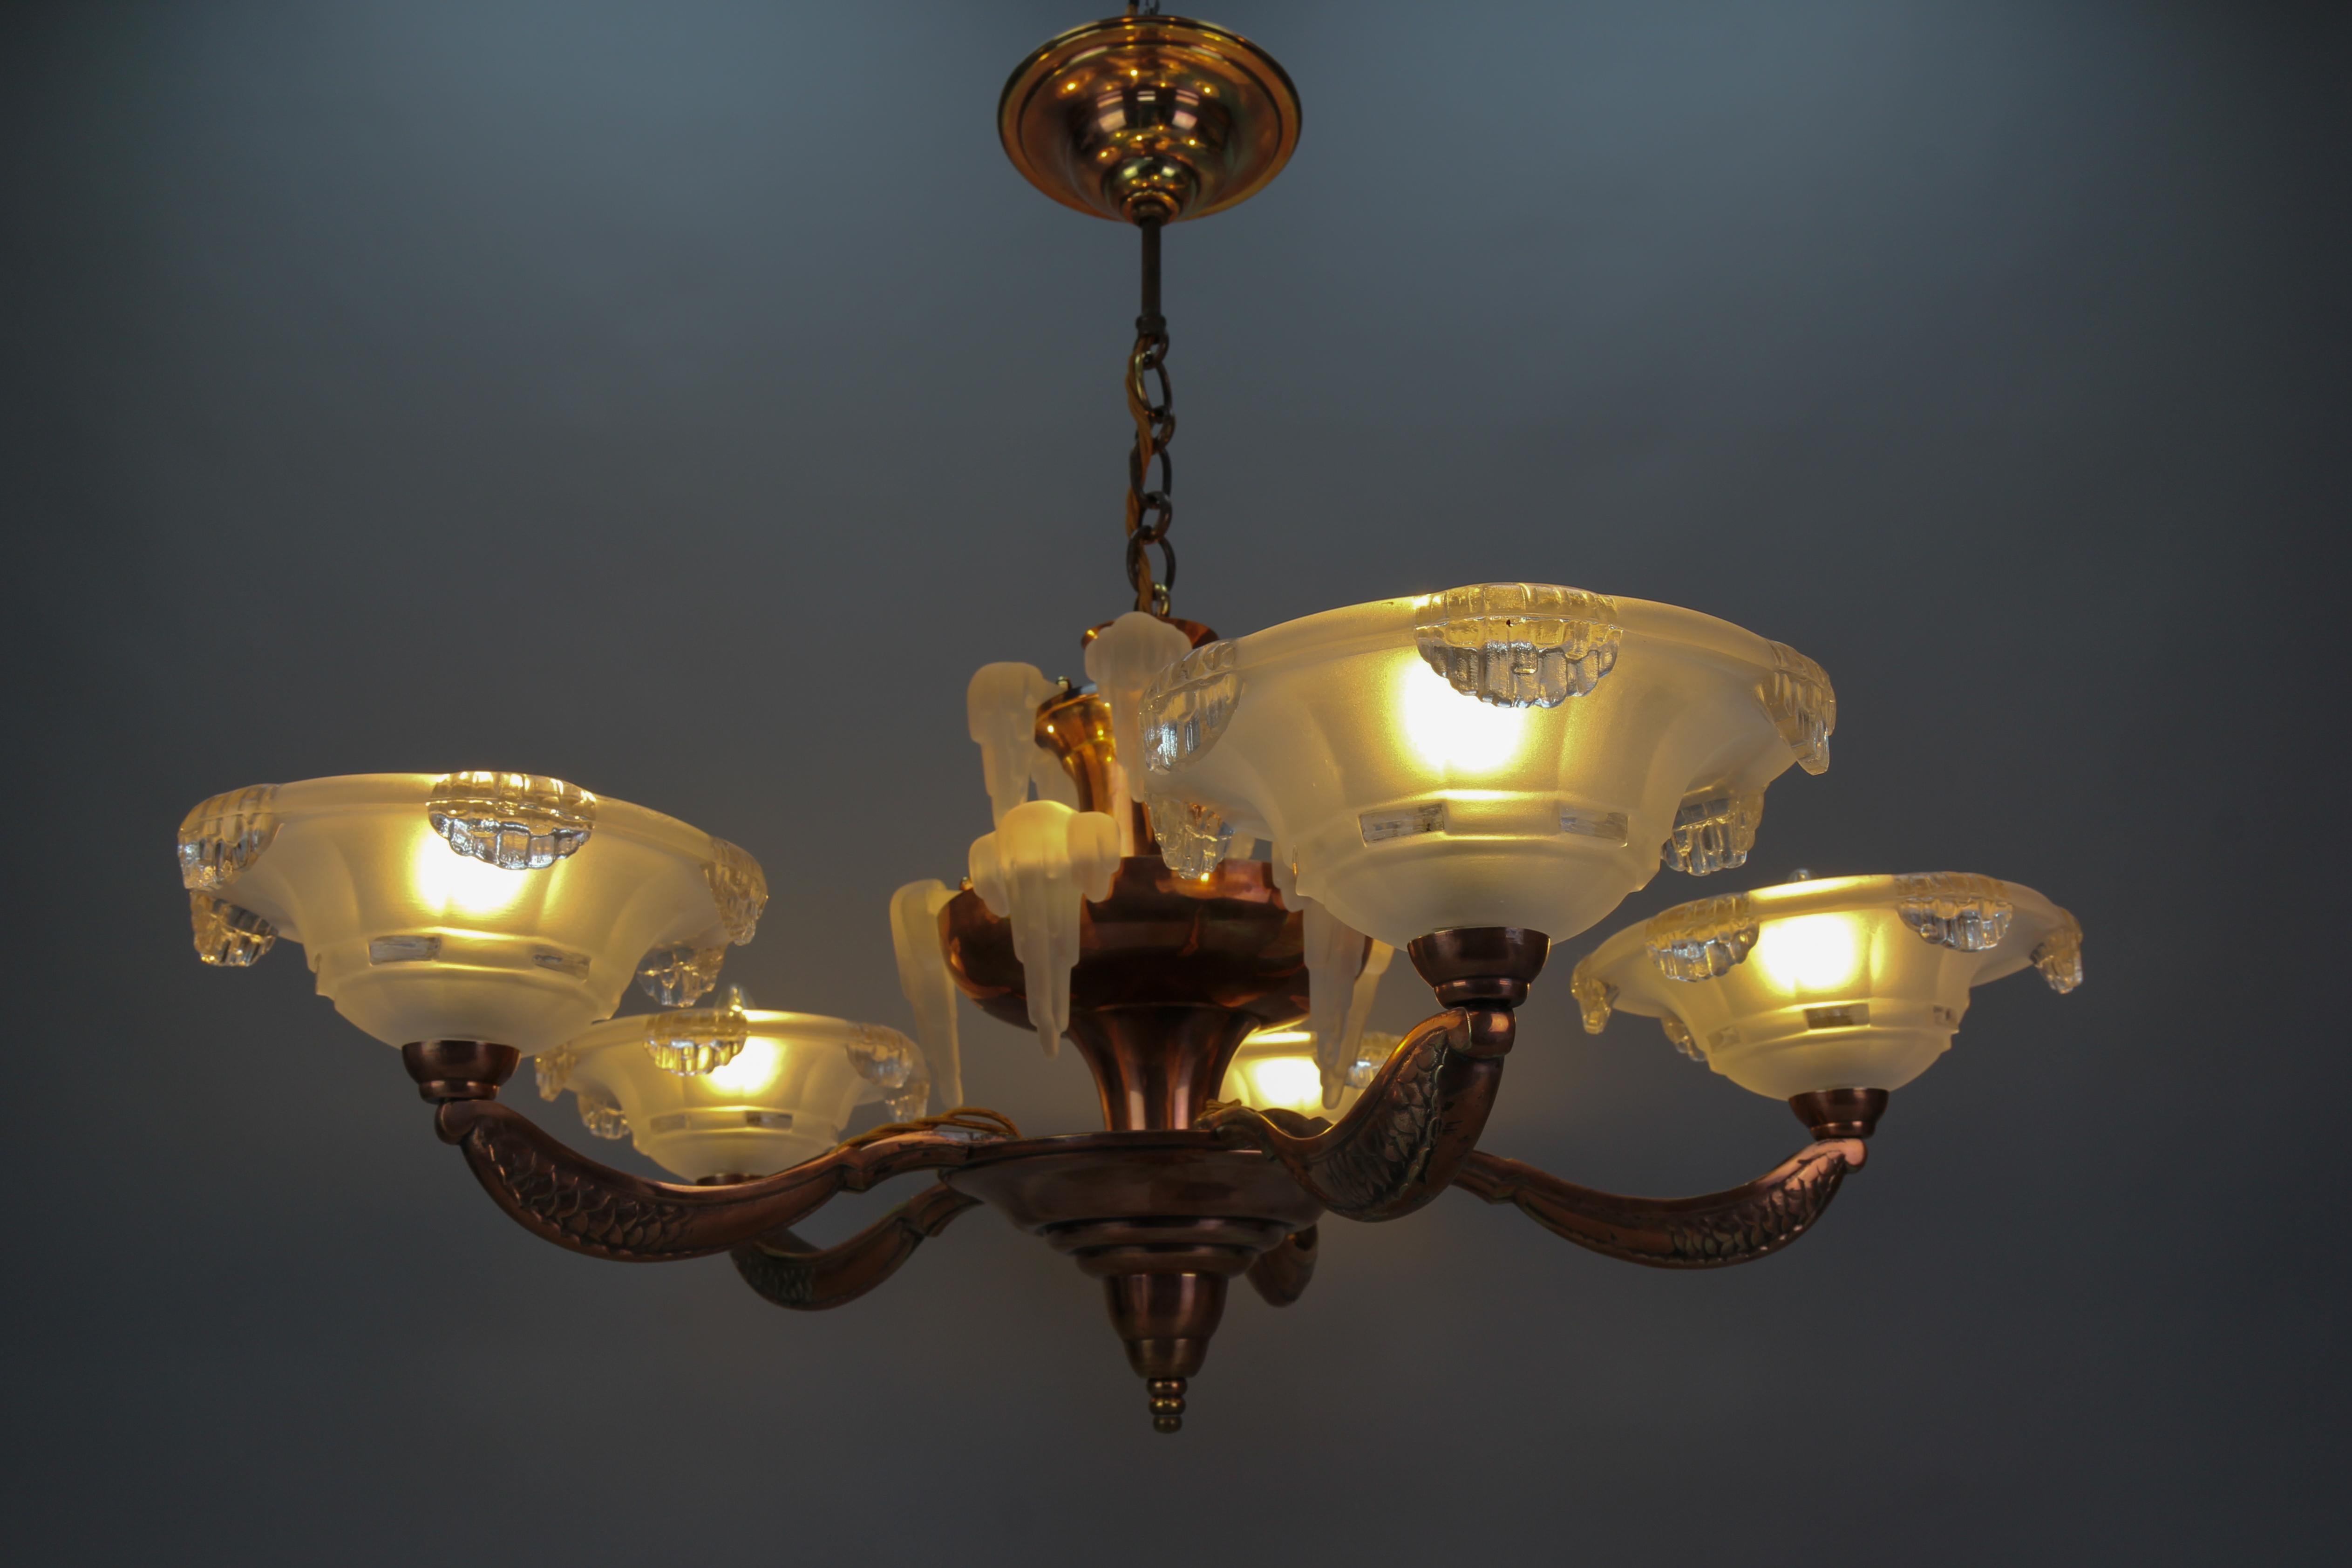 French Art Deco 7-Light Frosted Glass, Brass and Copper Chandelier, 1930s For Sale 1